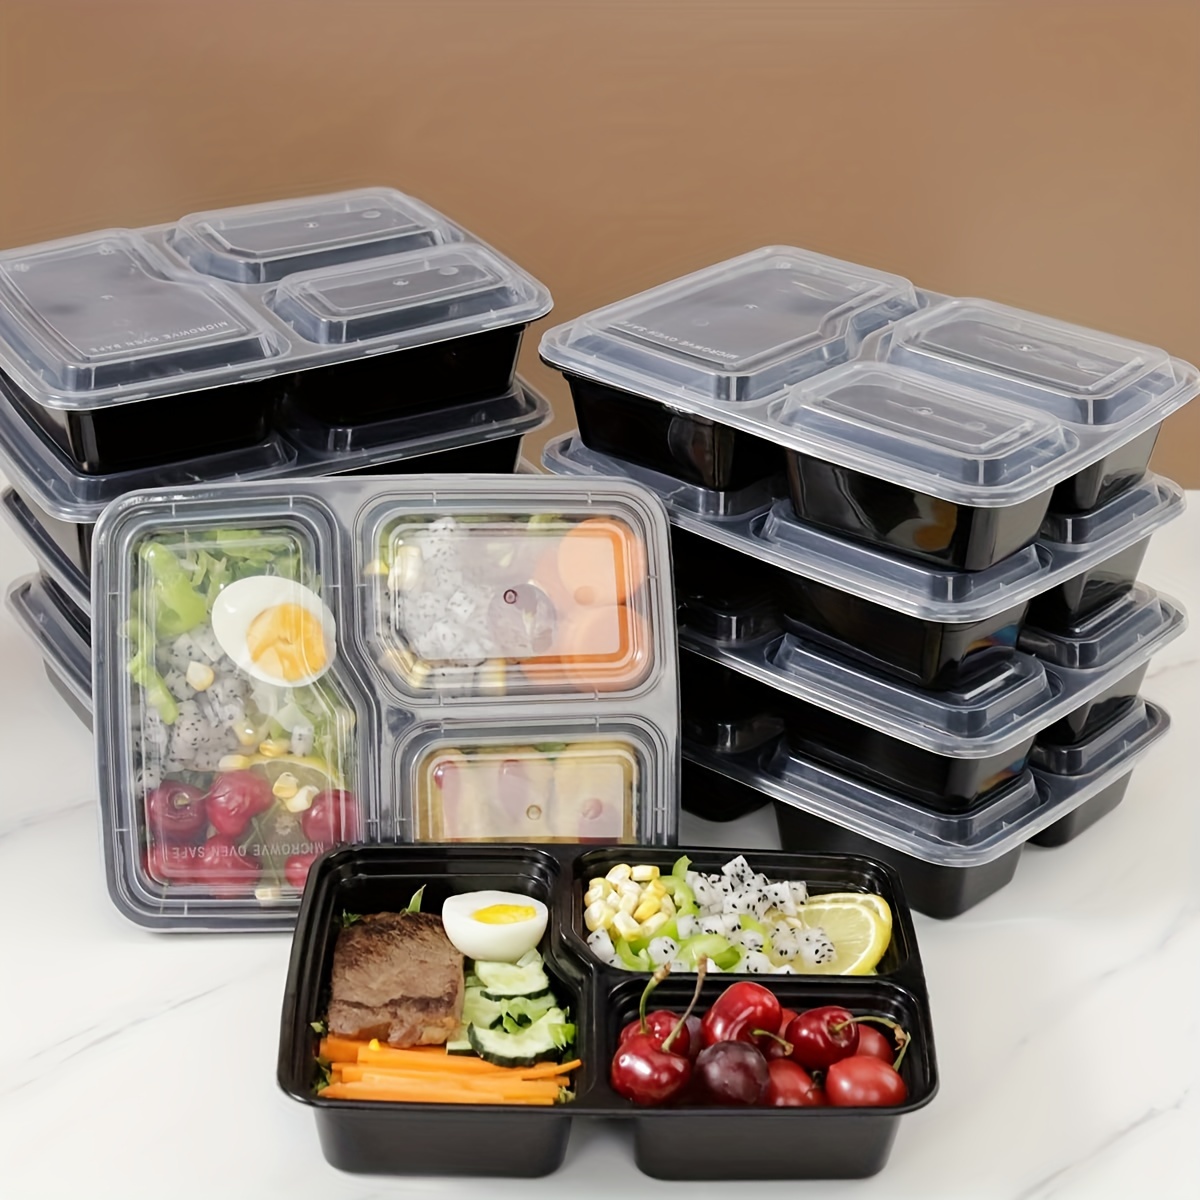 Freshware Meal Prep Containers [25 Pack] 3 Compartment with Lids, Food  Storage Containers, Bento Box, Stackable, Microwave/Dishwasher Safe (32 oz)